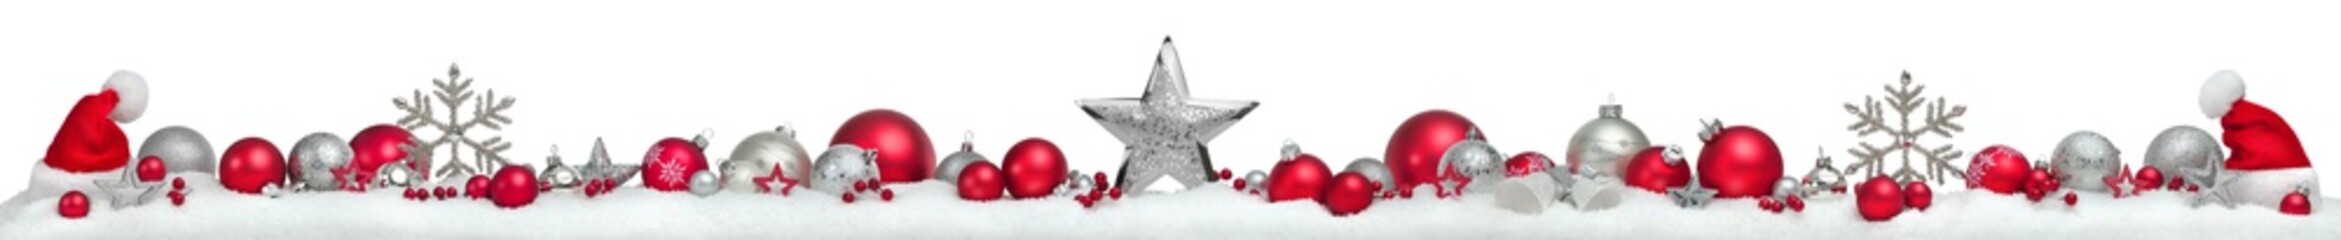 Christmas border or banner with stars and baubles arranged in a row on snow, extra wide and...